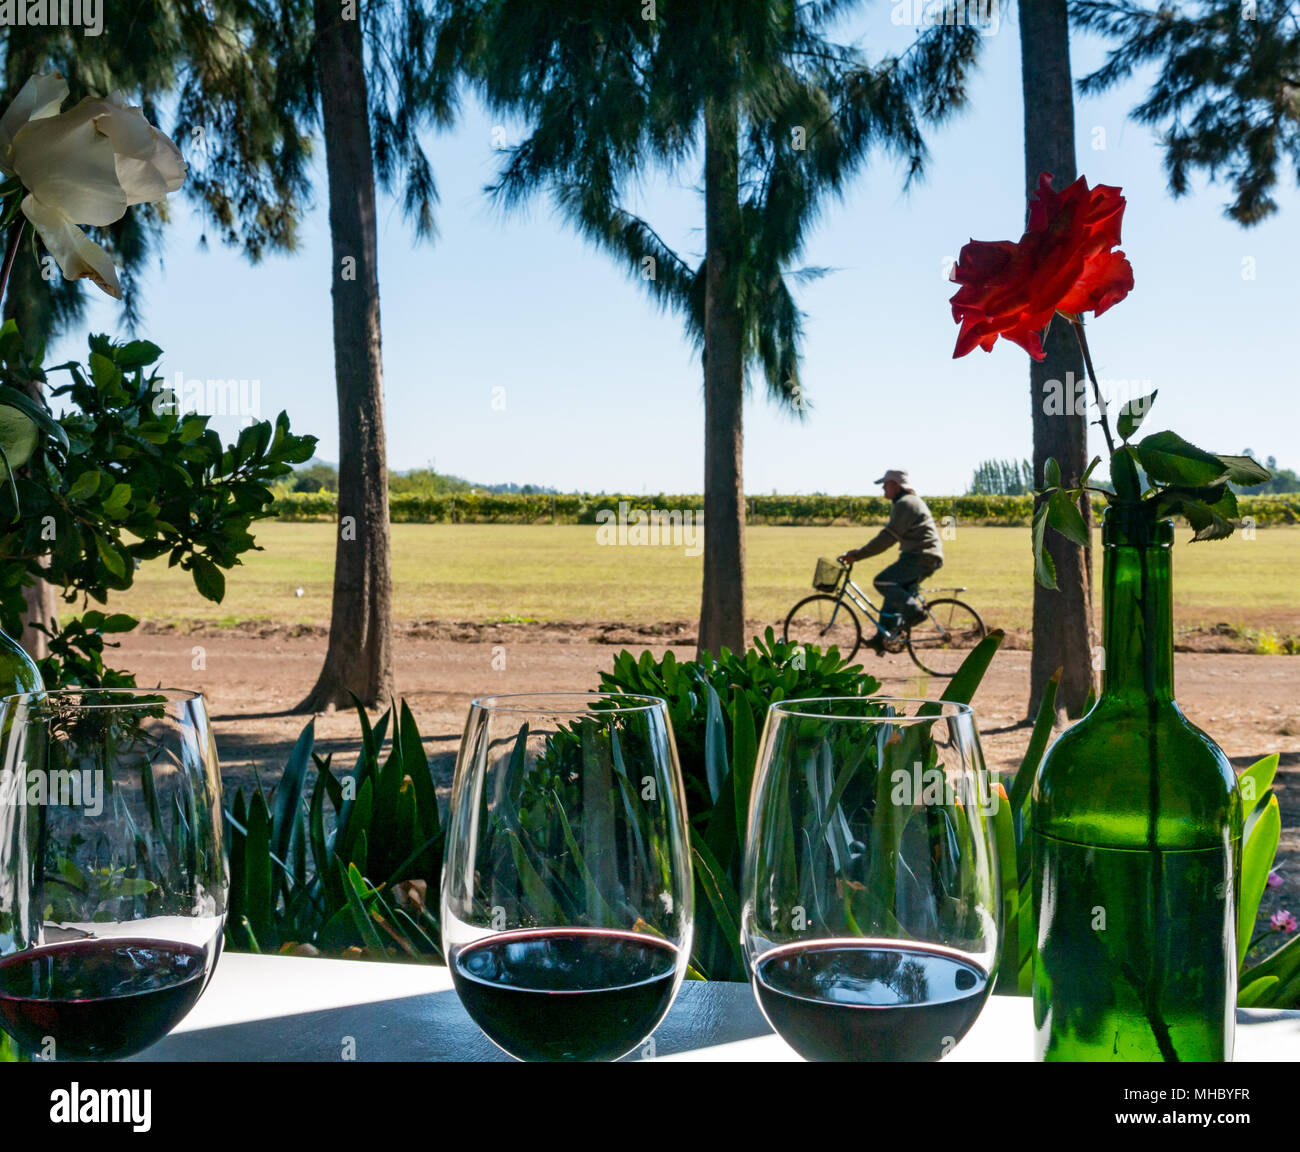 Wine tasting glasses, outside porch, at Laura Hartwig winery, Santa Cruz wine region, Colchagua Valley, Chile, with employee cycling past Stock Photo